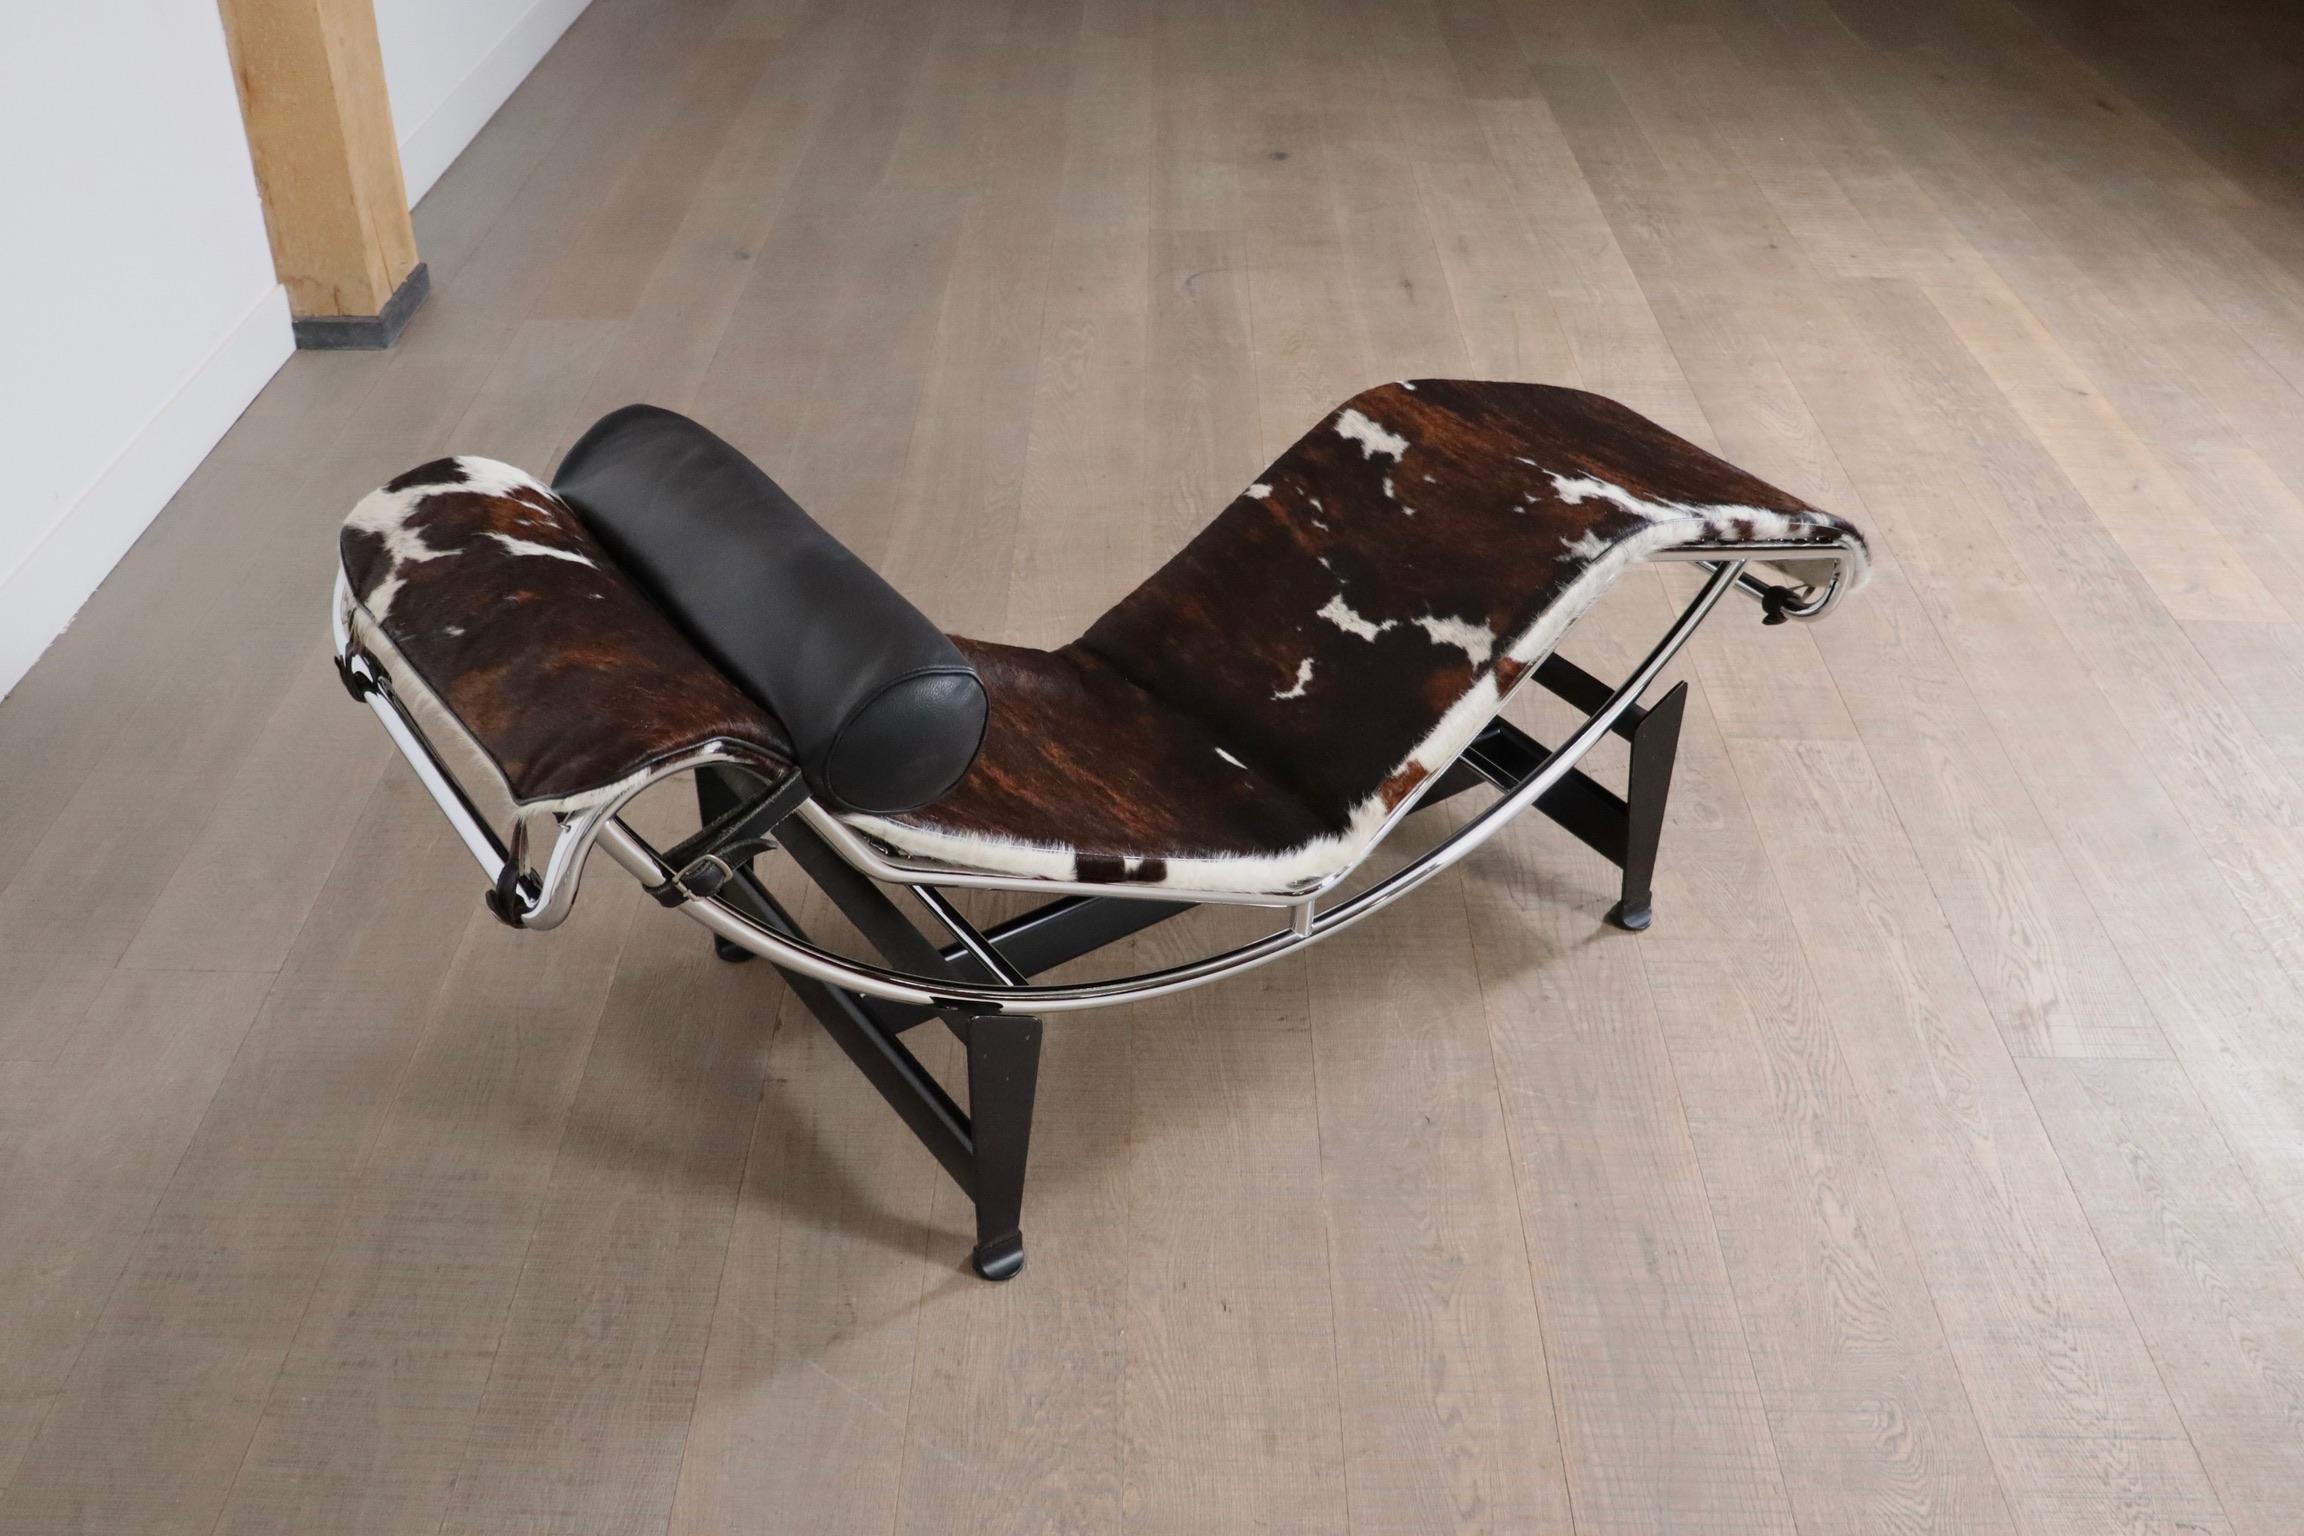 Metal Cassina LC4 Chaise Longue In brown Ponyskin By Le Corbusier, Charlotte Perriand